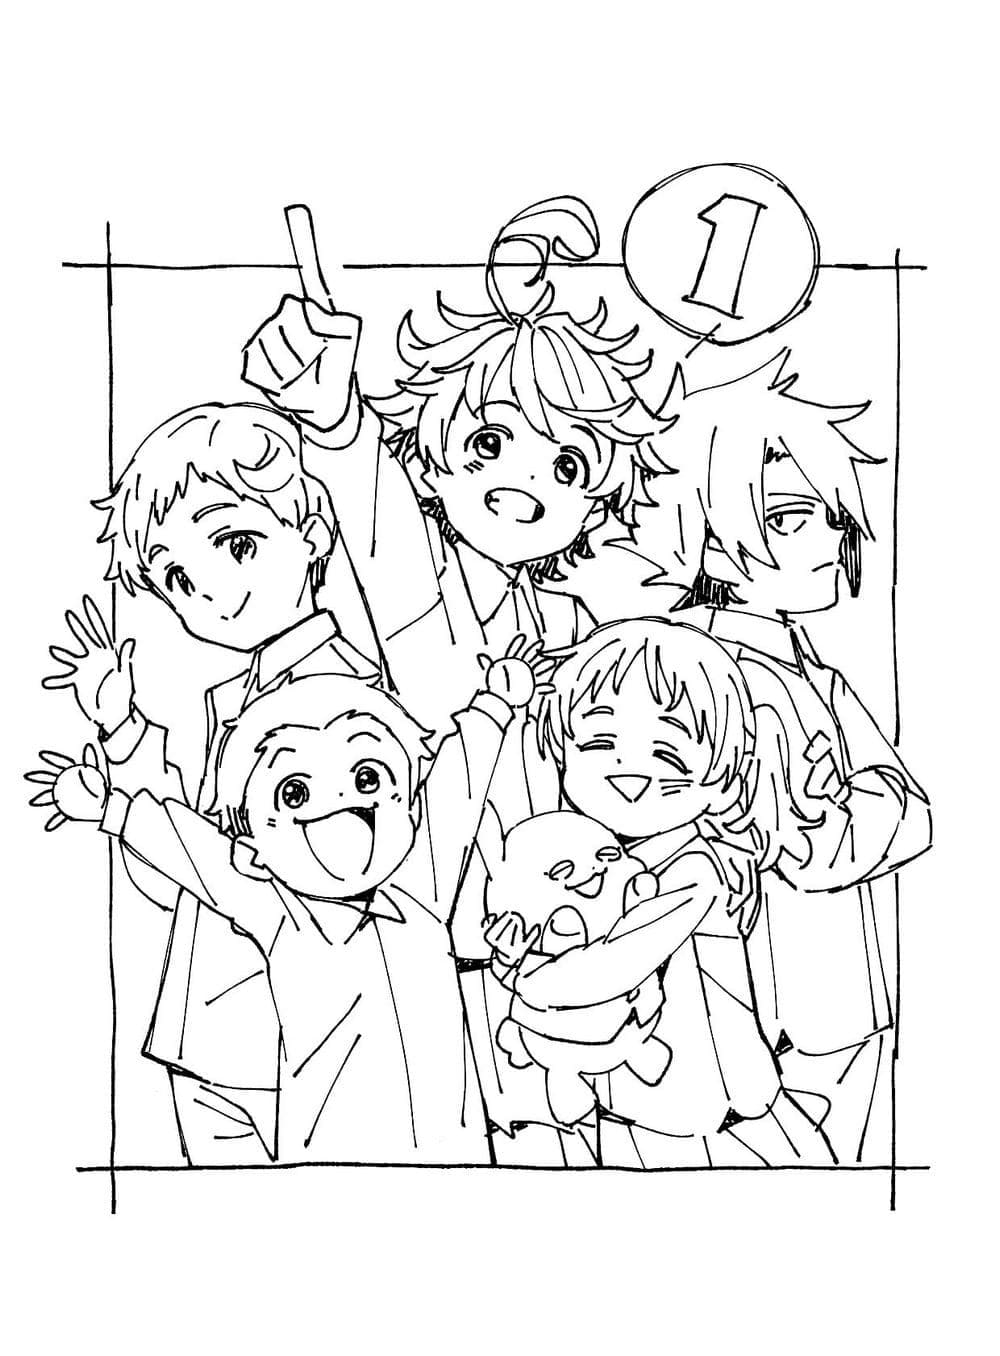 The Promised Neverland Printable Coloring Page   Free Printable ...